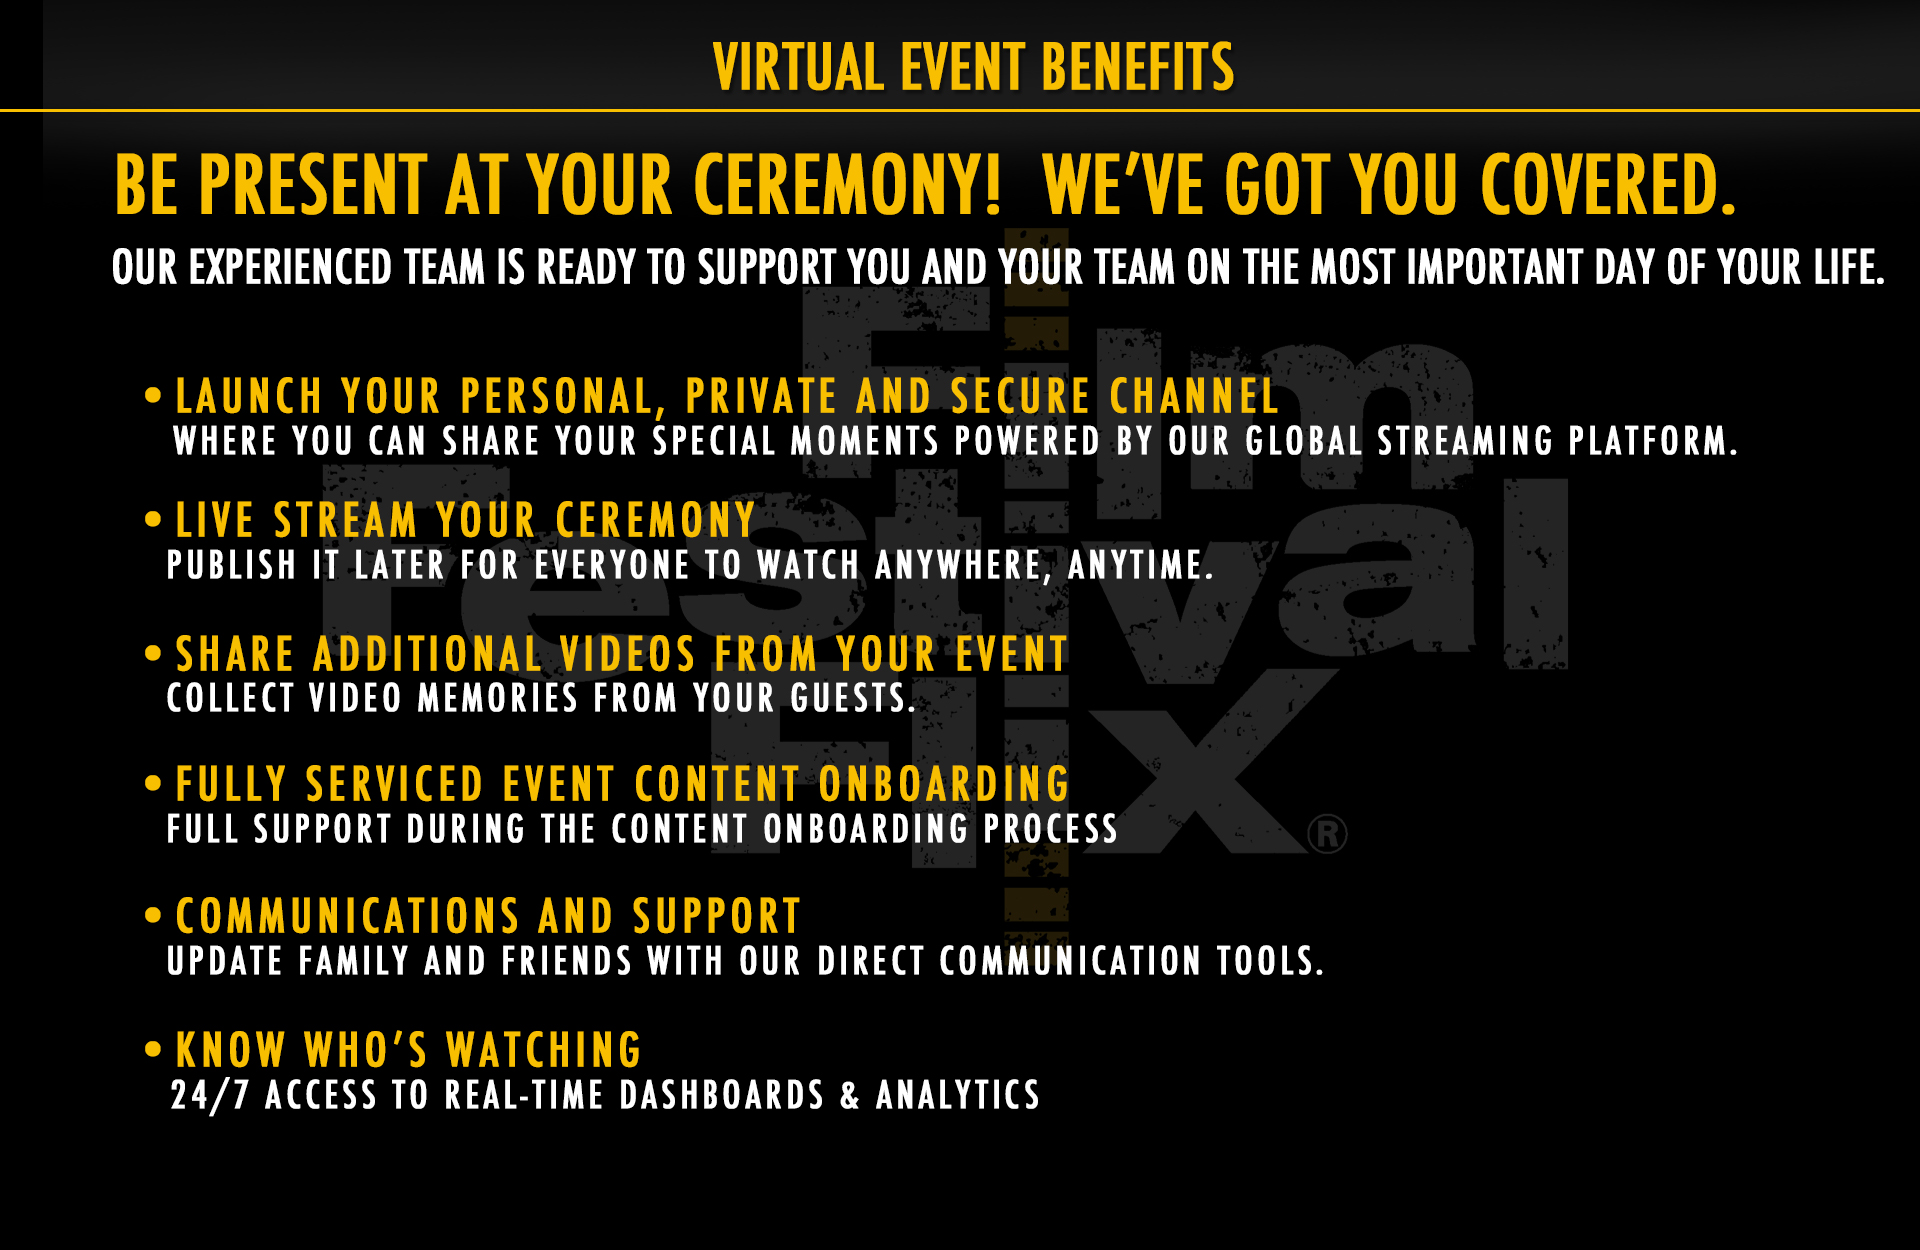 Virtual Venue Benefits. Be present at your ceremony. We've got you covered. Our experienced team is ready to support you and your team on the most important day of your life. Launch your own personal, private and secure channel where you can share your special moments powered by our global streaming platform. Livestream your ceremony. Publish it later for everyone to watch anywhere, anytime. Share additional videos from your event. Collect video memories from your guests. We provide full service and support during your content onboarding process. Update family and friends with our direct communication tools. Know who's watching with 24/7 access to real-time dashboards and analytics. 